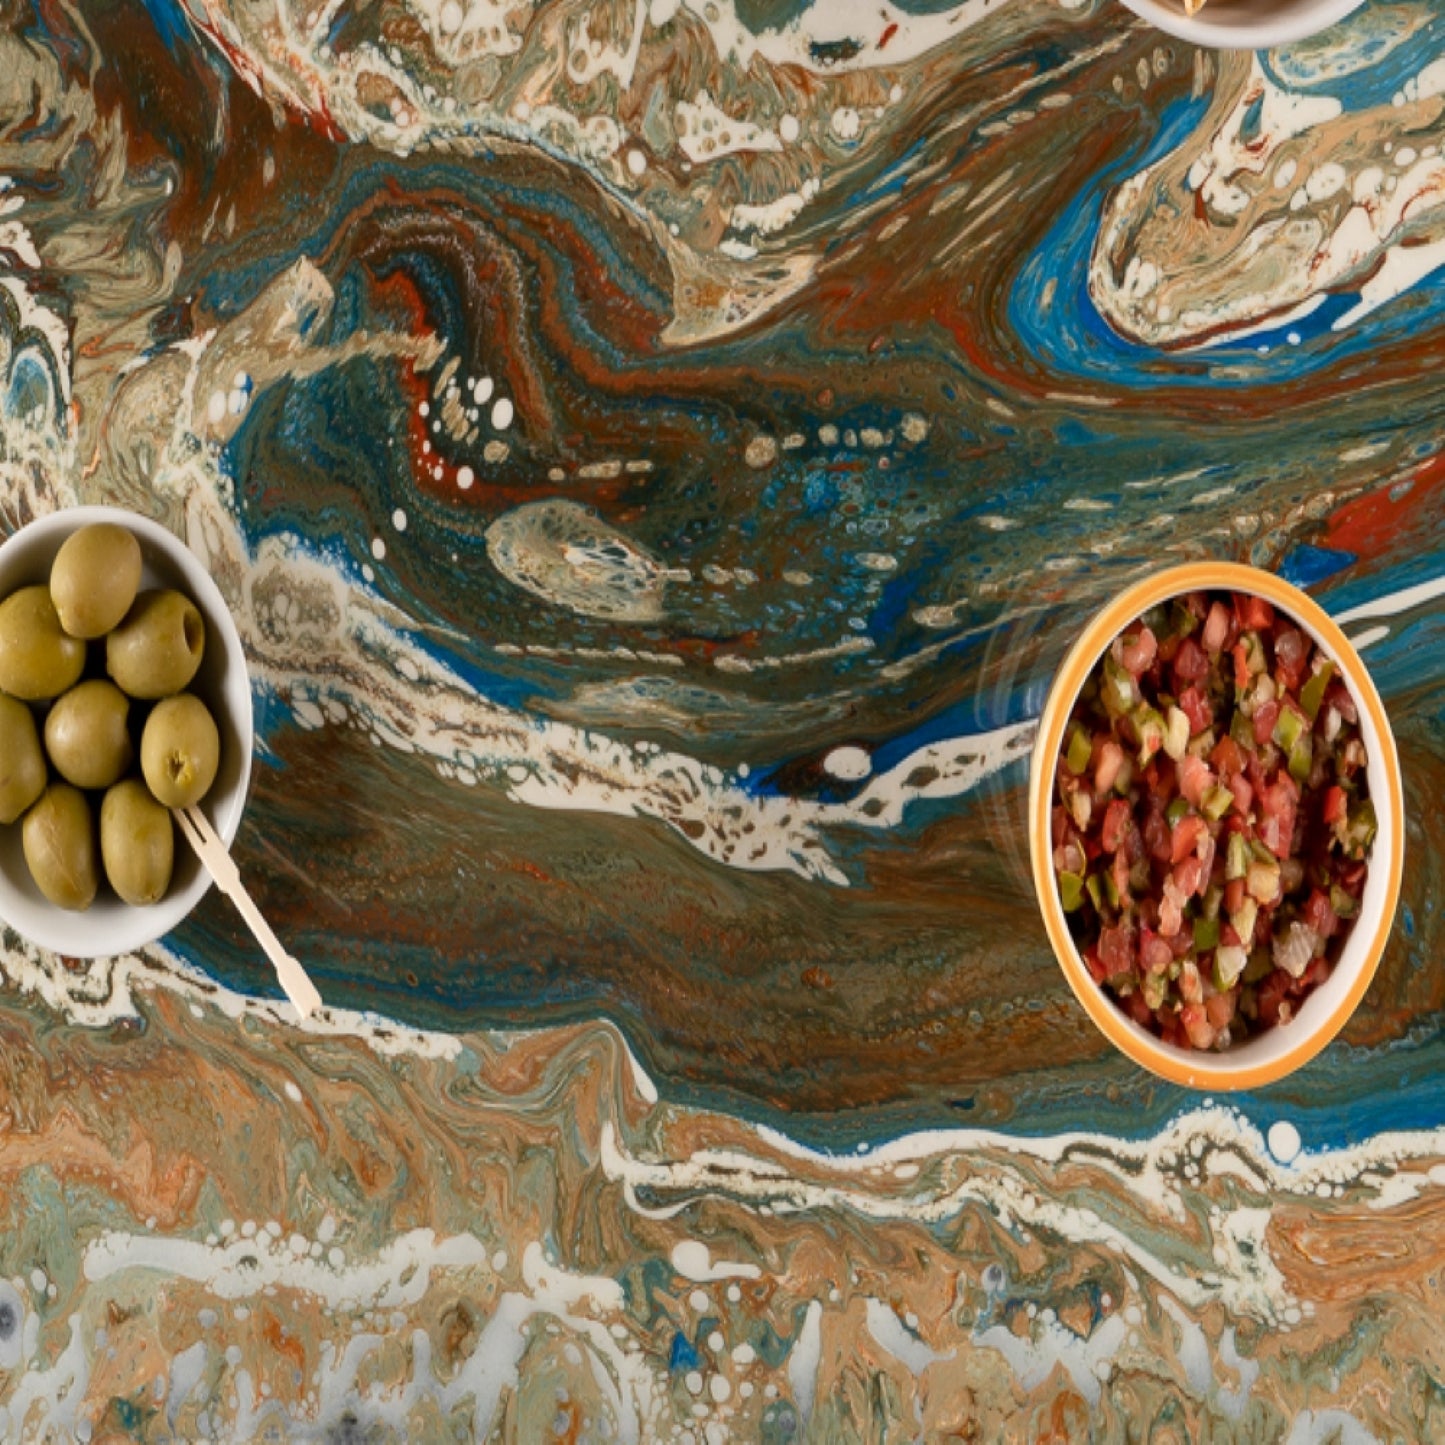 Maui countertop's captivating design draws inspiration from nature's palette.